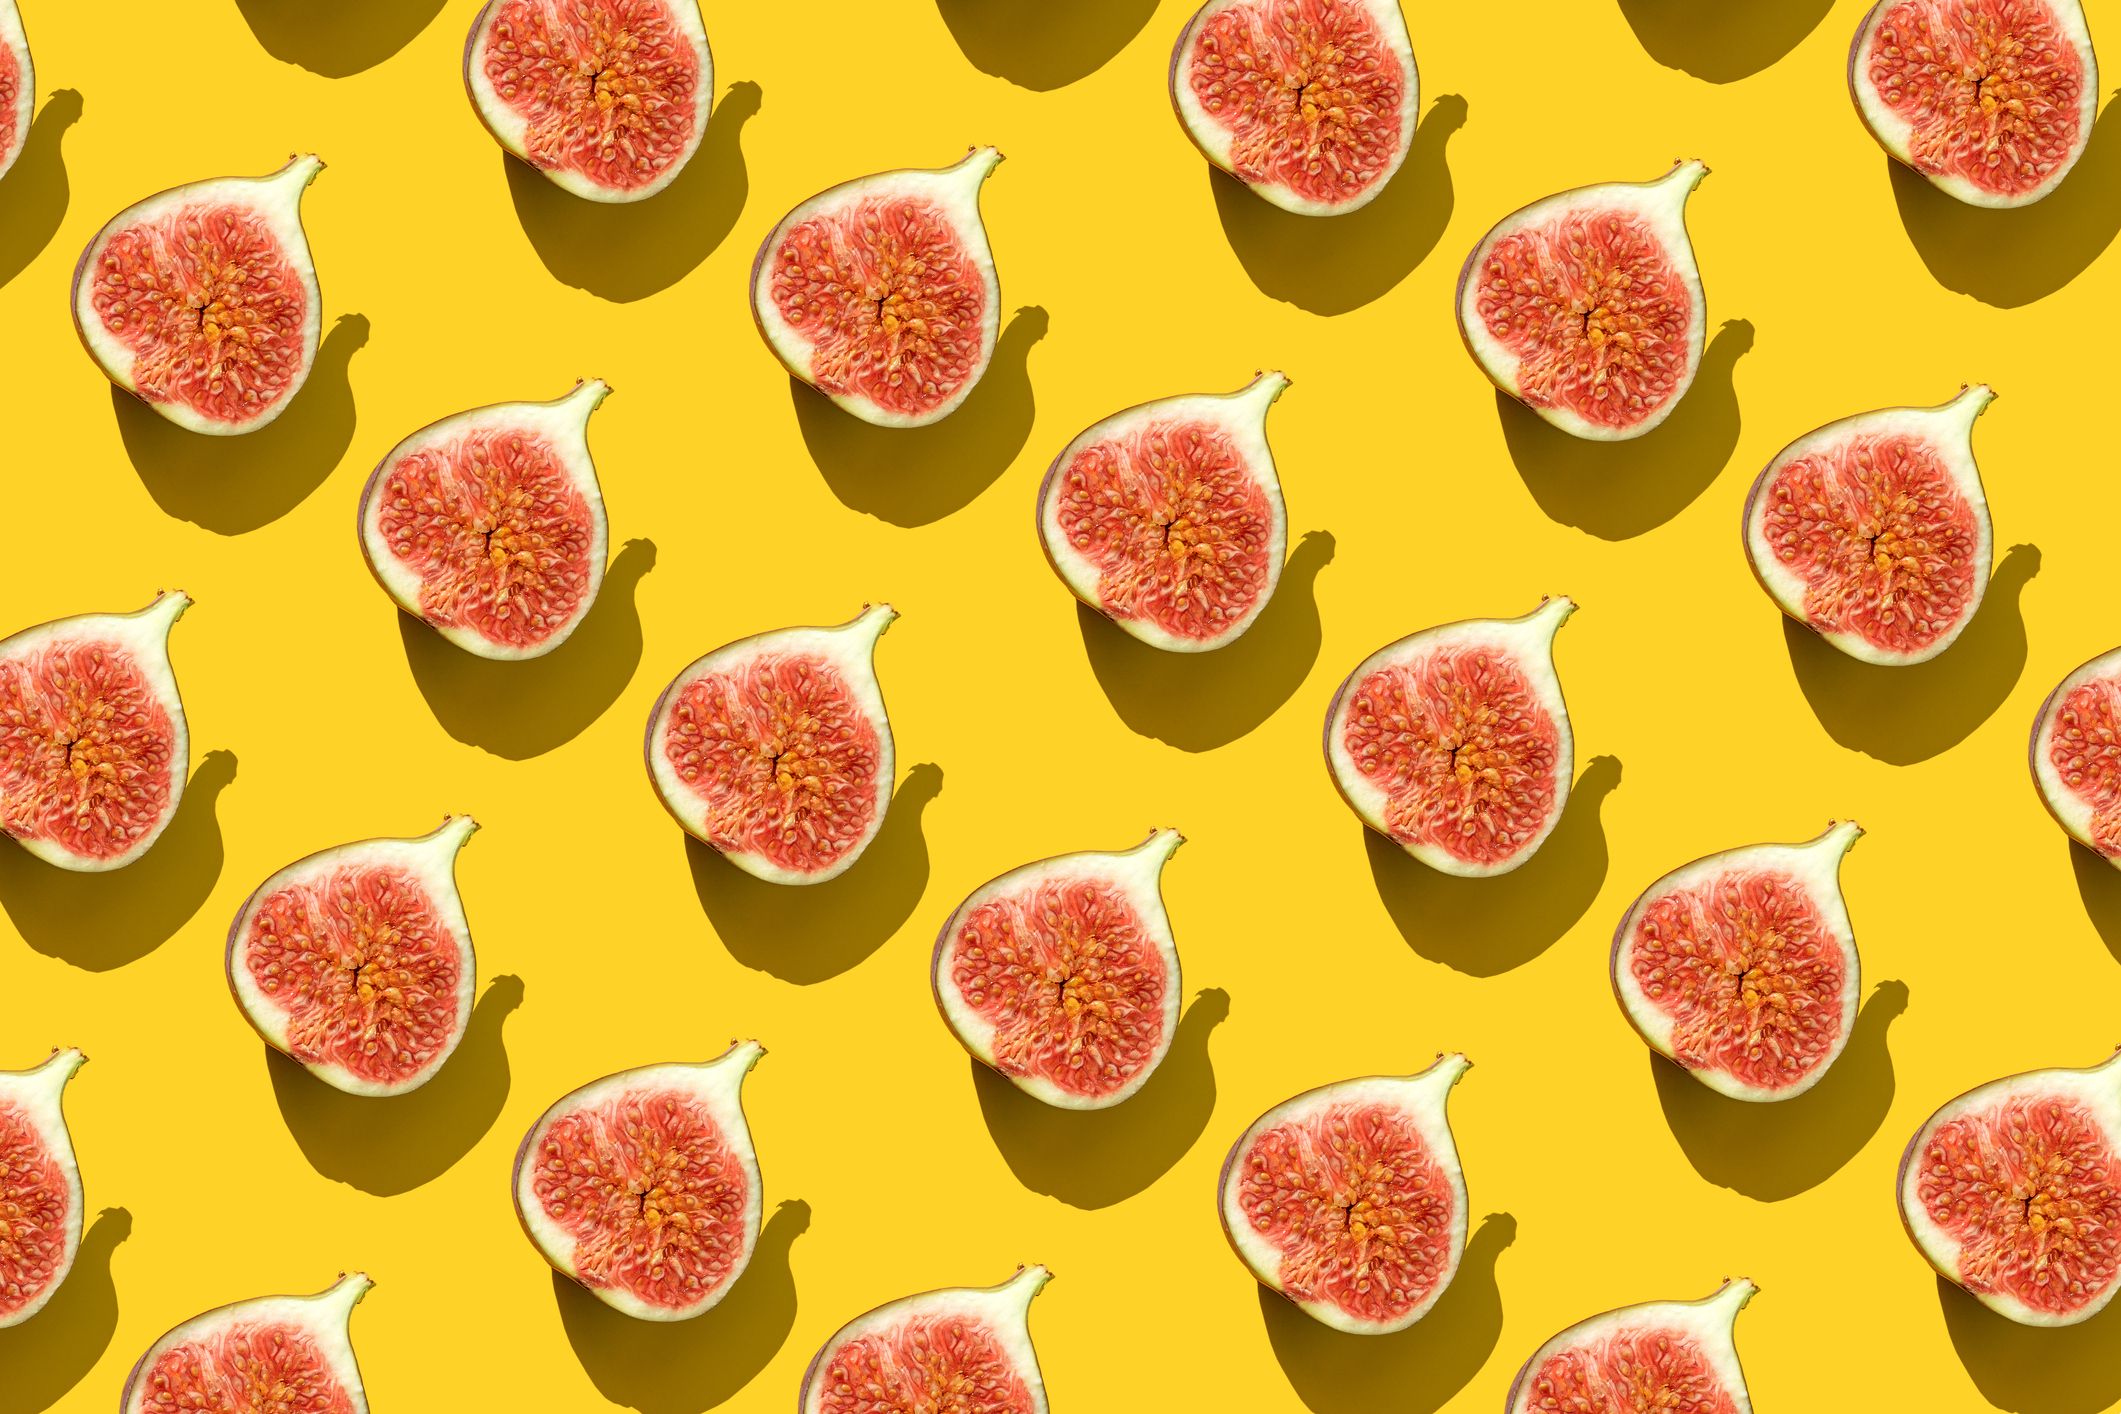 repeated figs on the yellow background